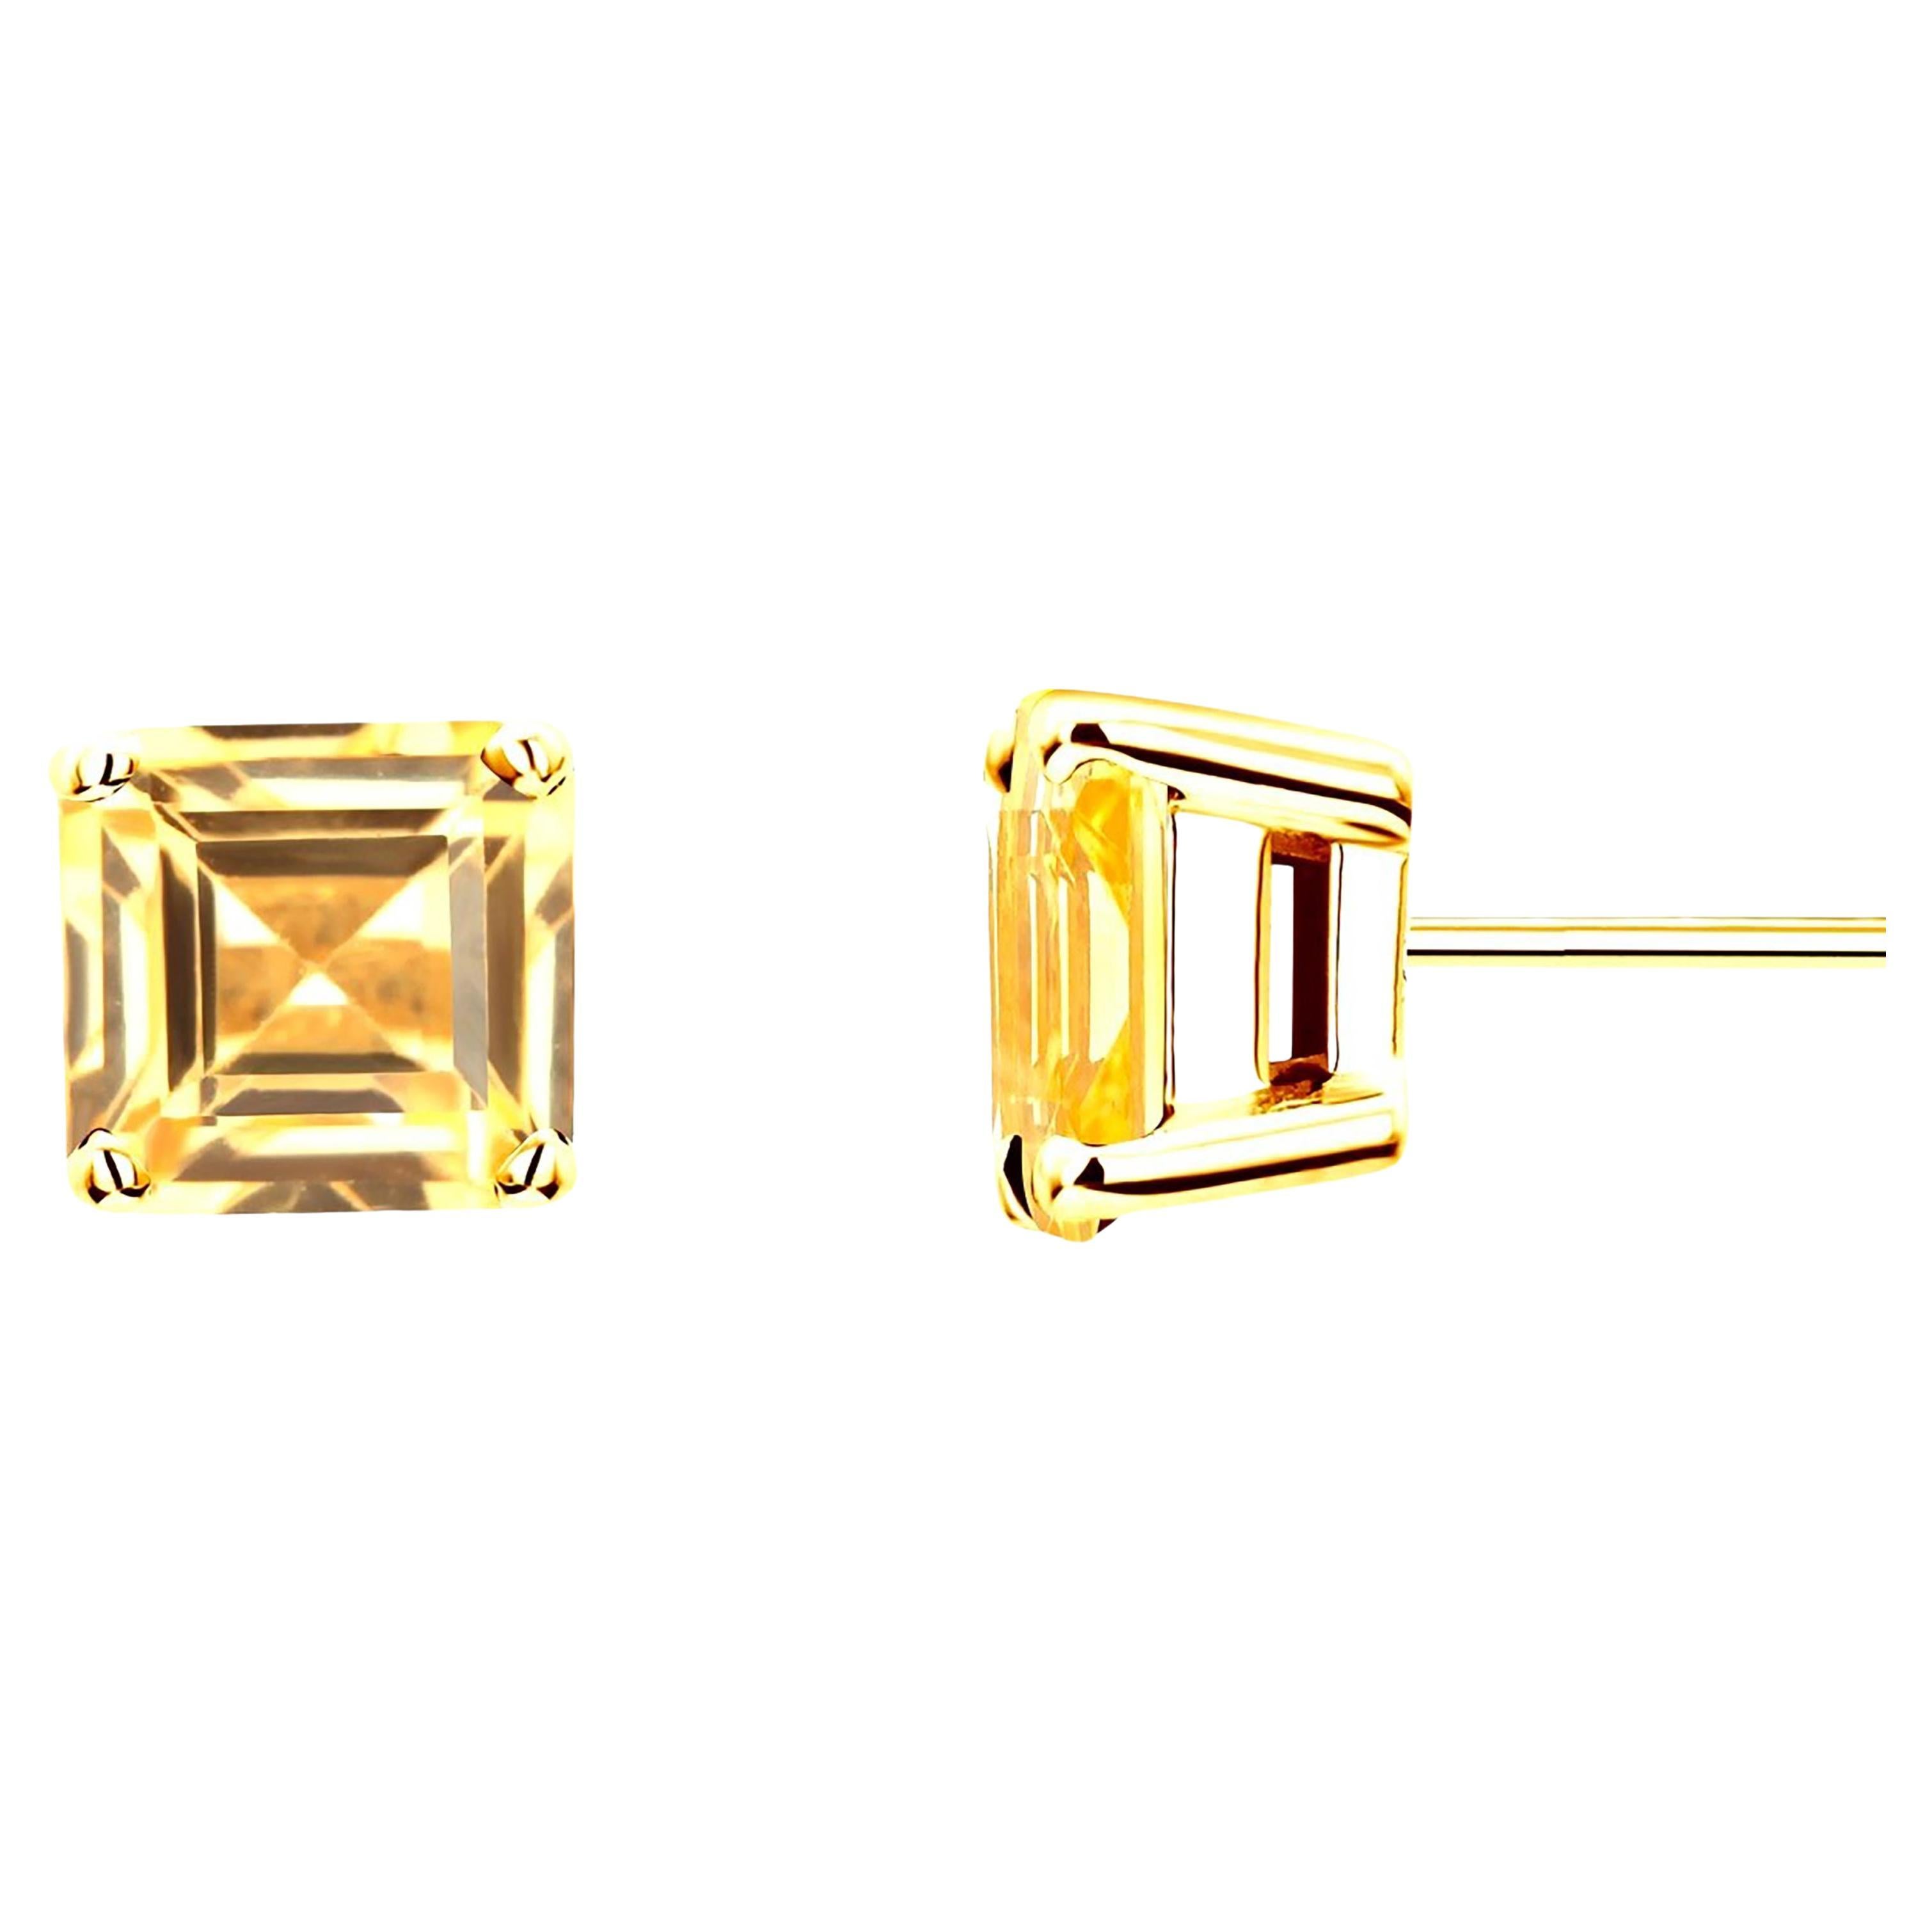 Square Shaped Ceylon Yellow Sapphire Set in Yellow Gold Stud Earrings